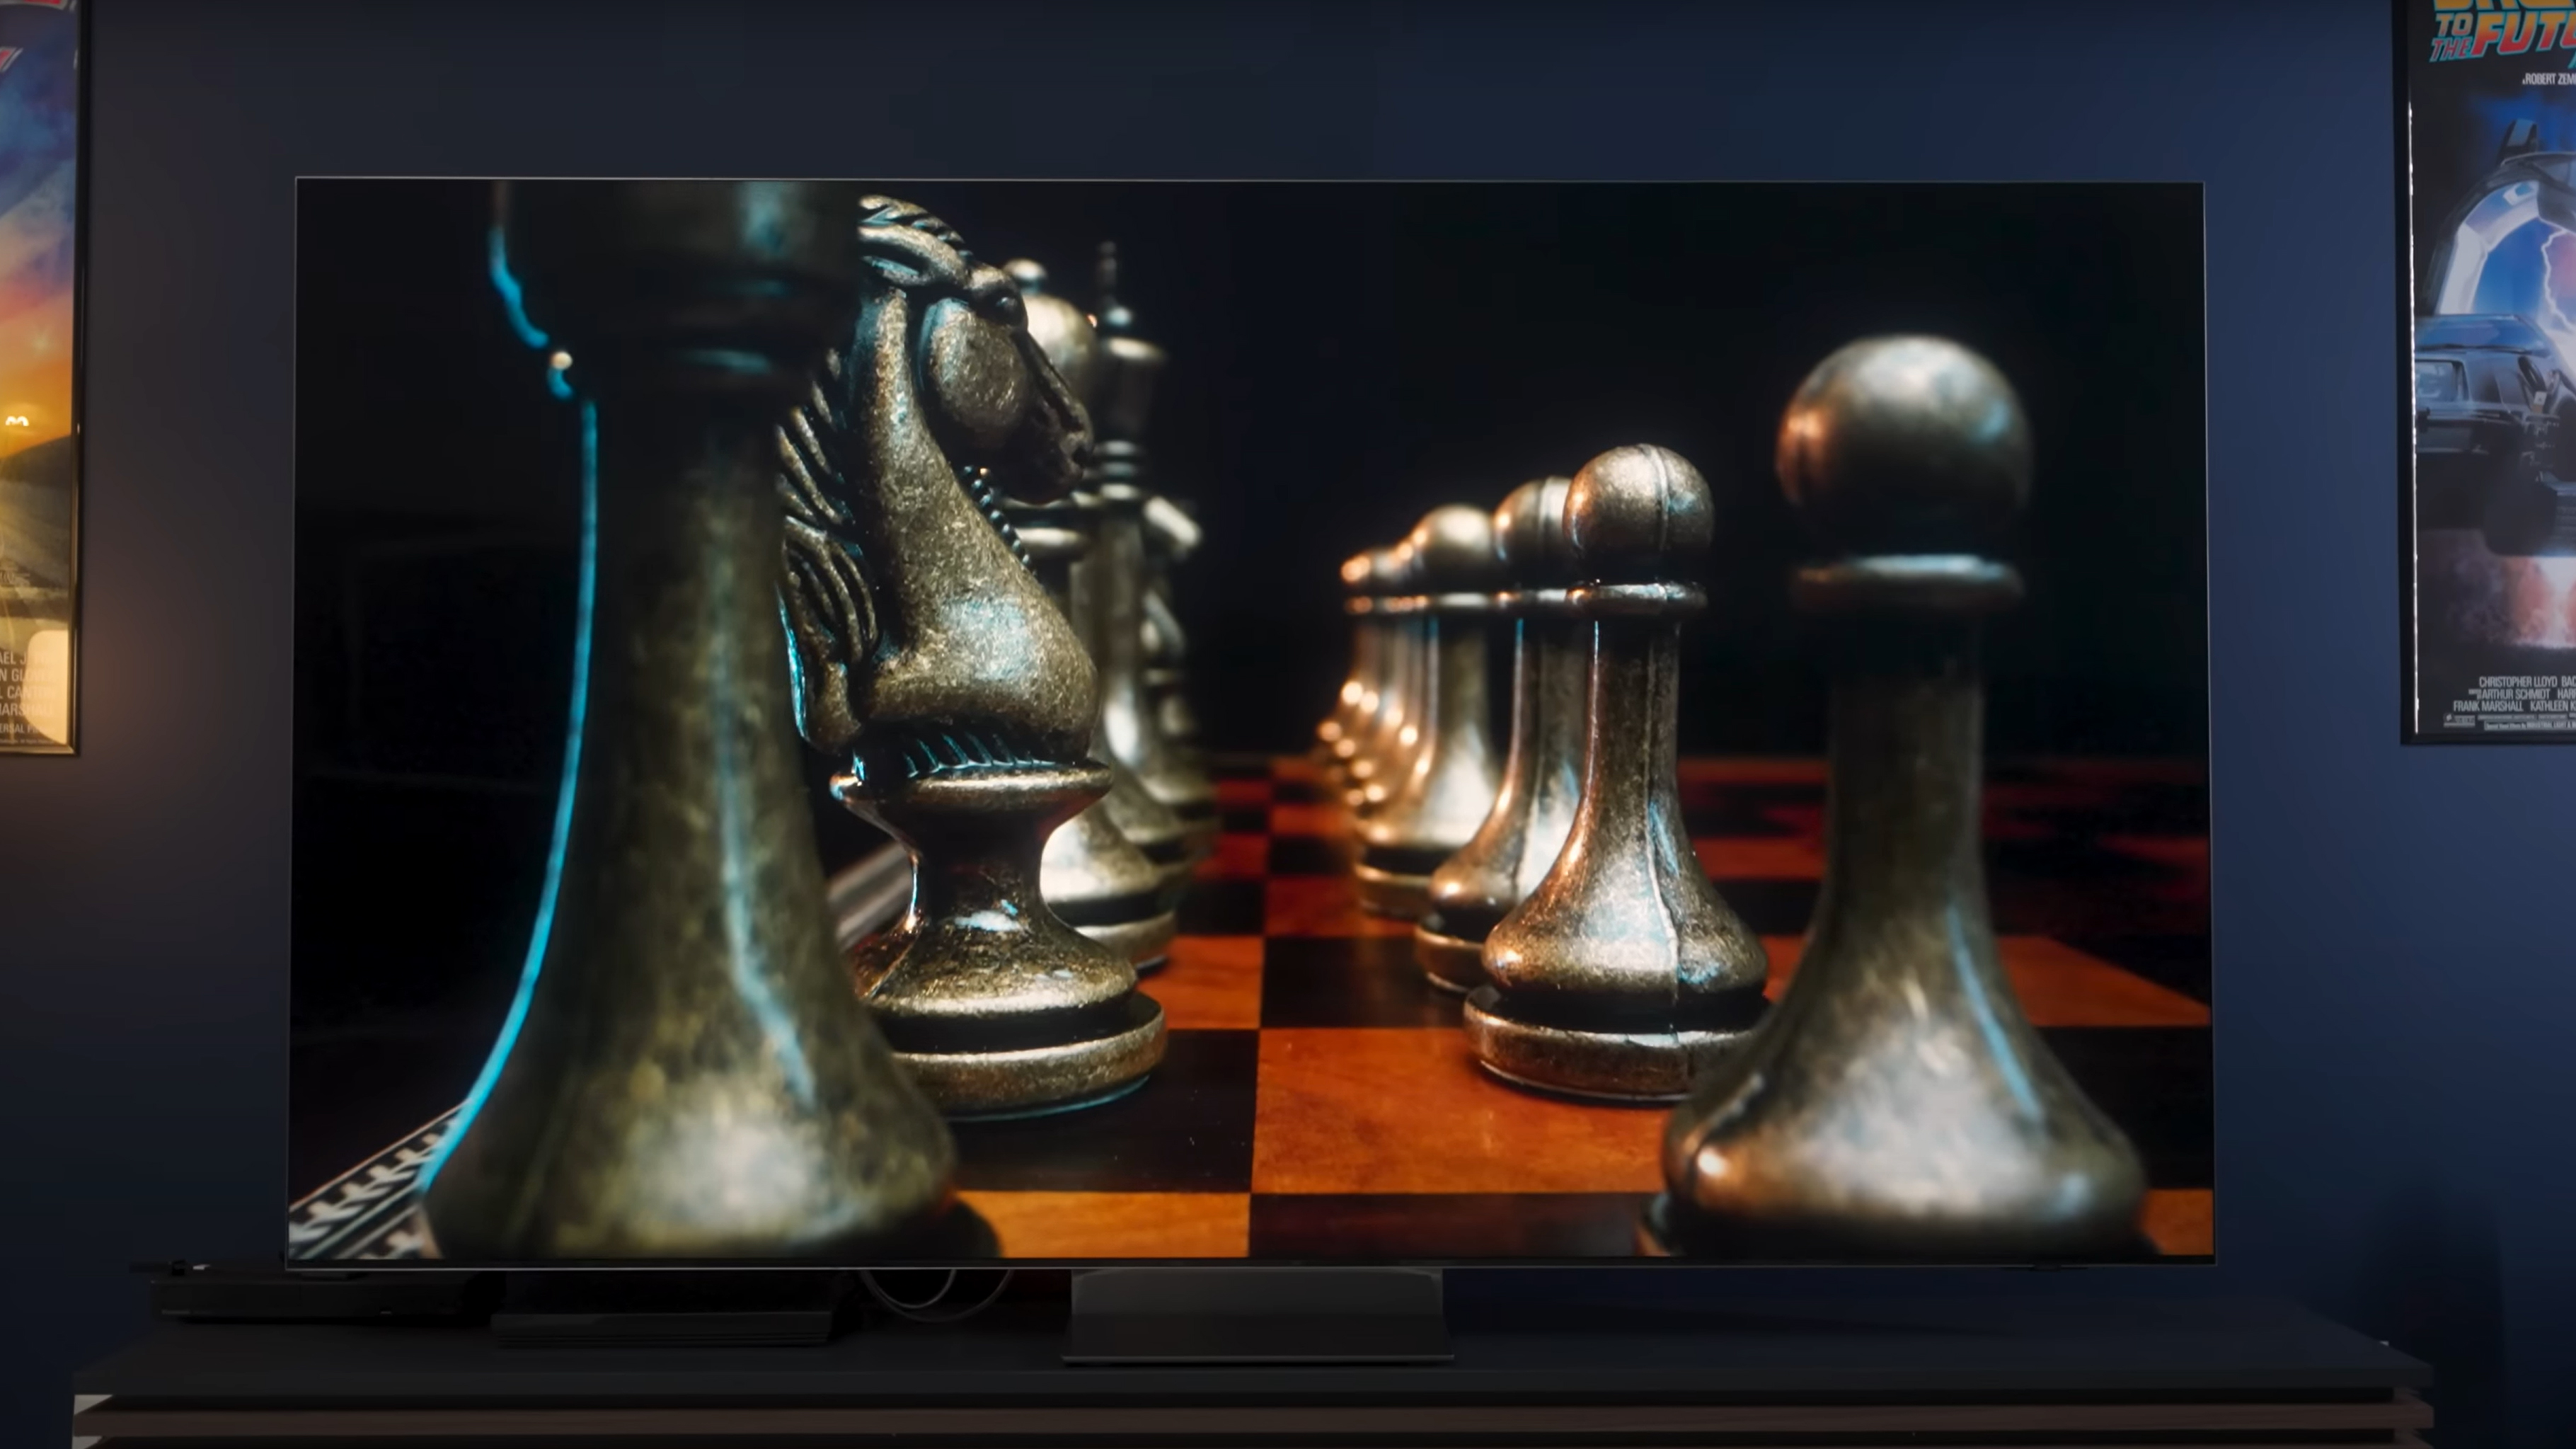 A closeup view of two ranks of chess pieces on a board shown on a Samsung QN900D.